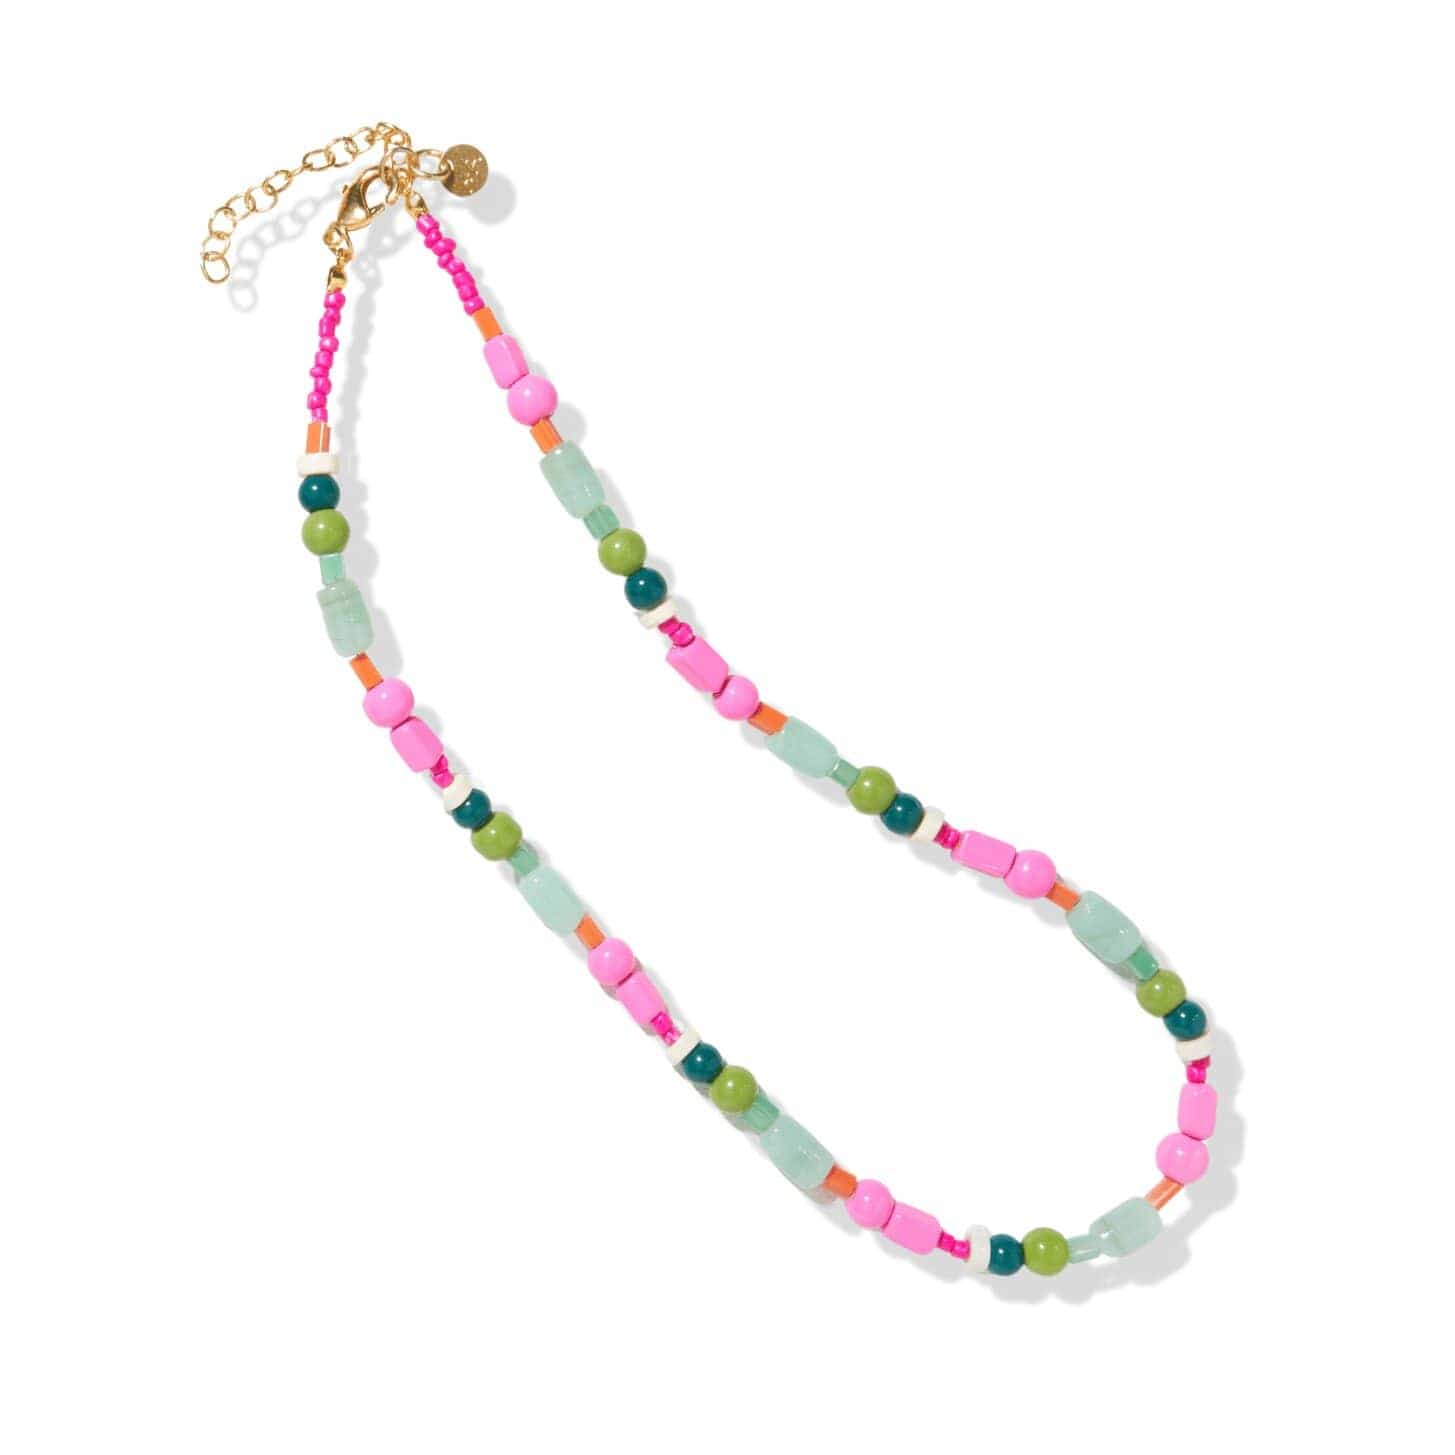 Pink Opaque crystal beads necklace set with a white cz stone balls pen –  Soyara Ethnics Studio